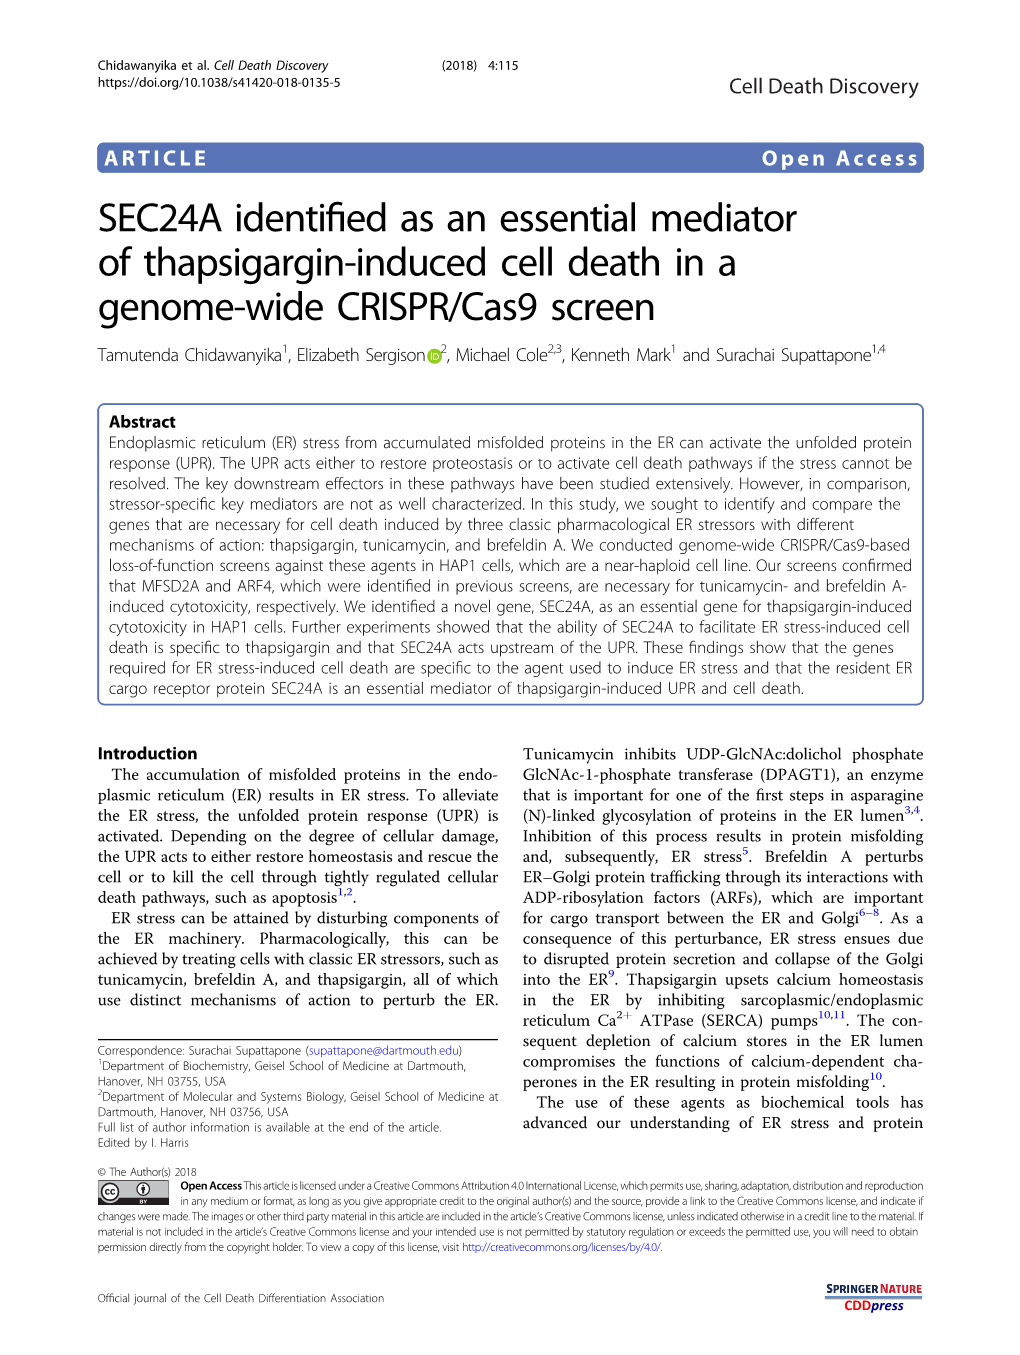 SEC24A Identified As an Essential Mediator of Thapsigargin-Induced